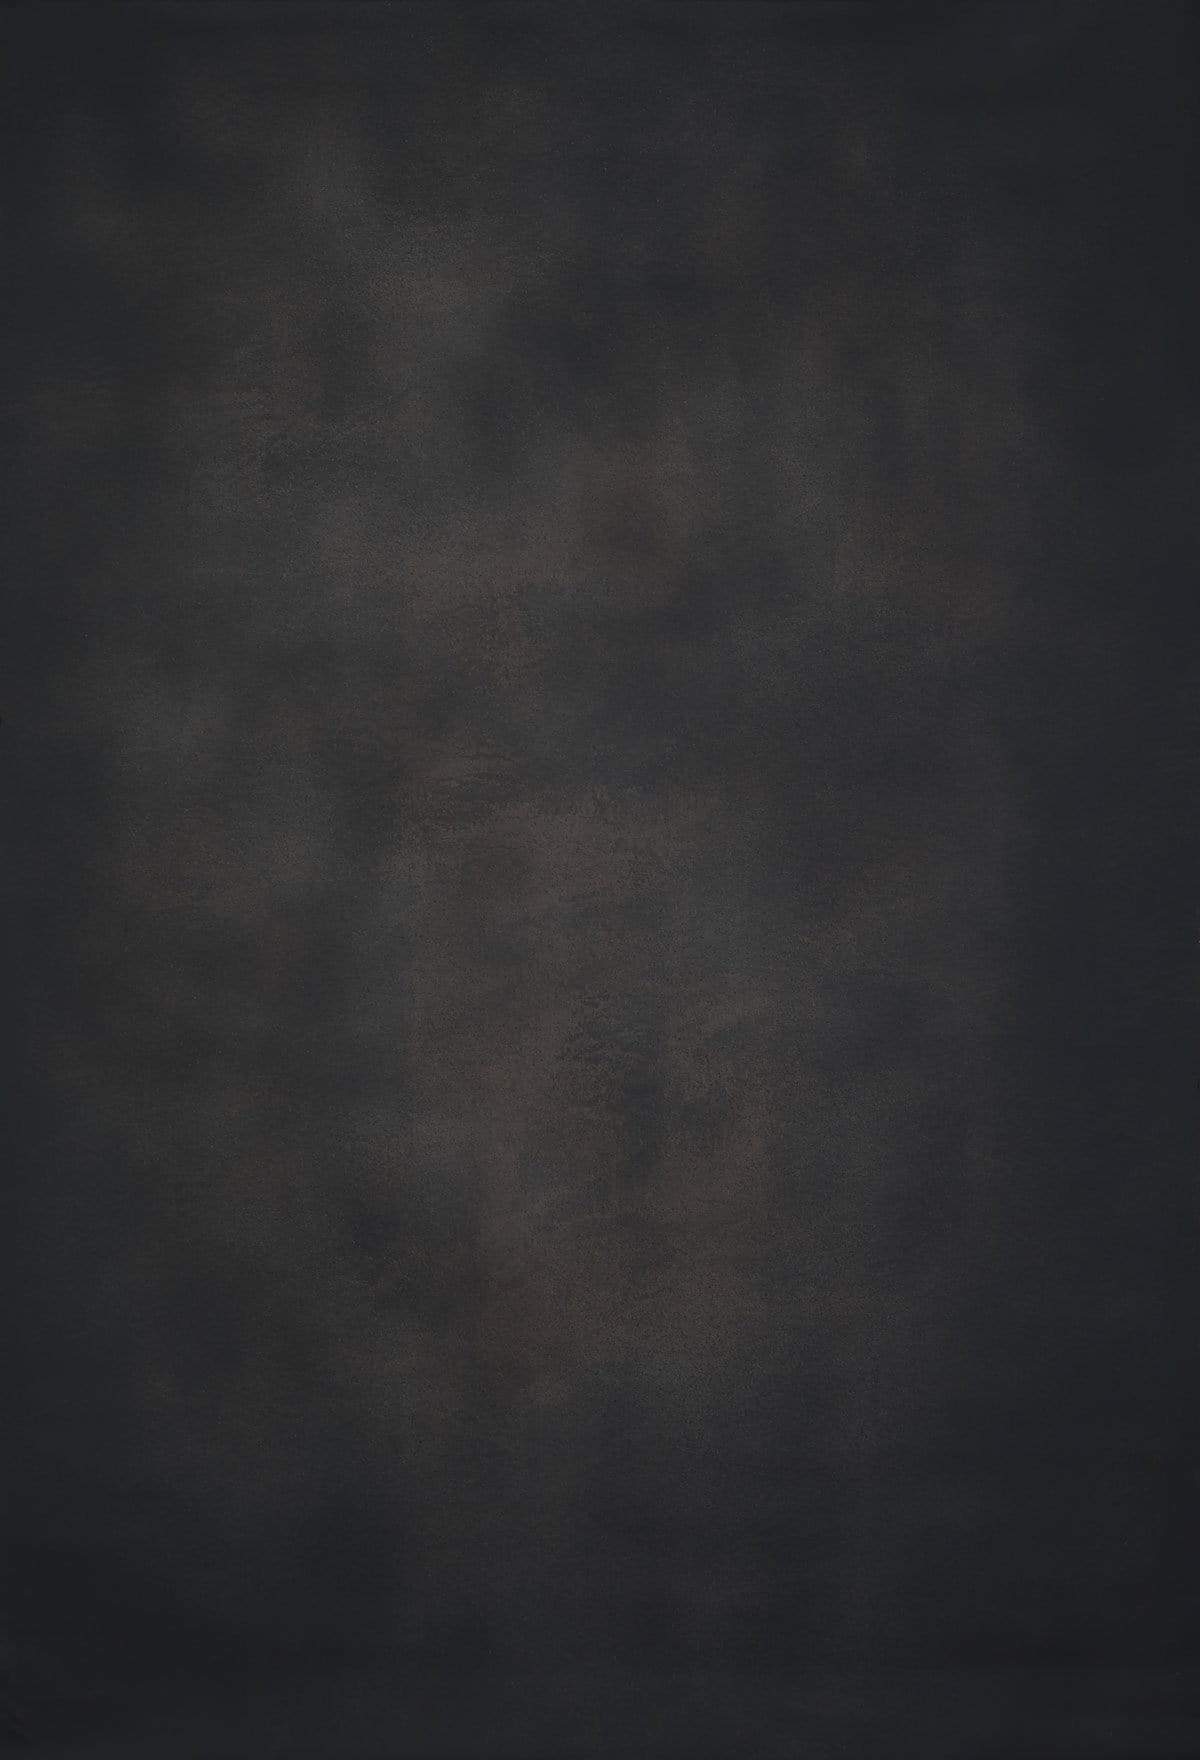 Kate Dark Gray Mixed Brown Abstract Backdrop for Photography